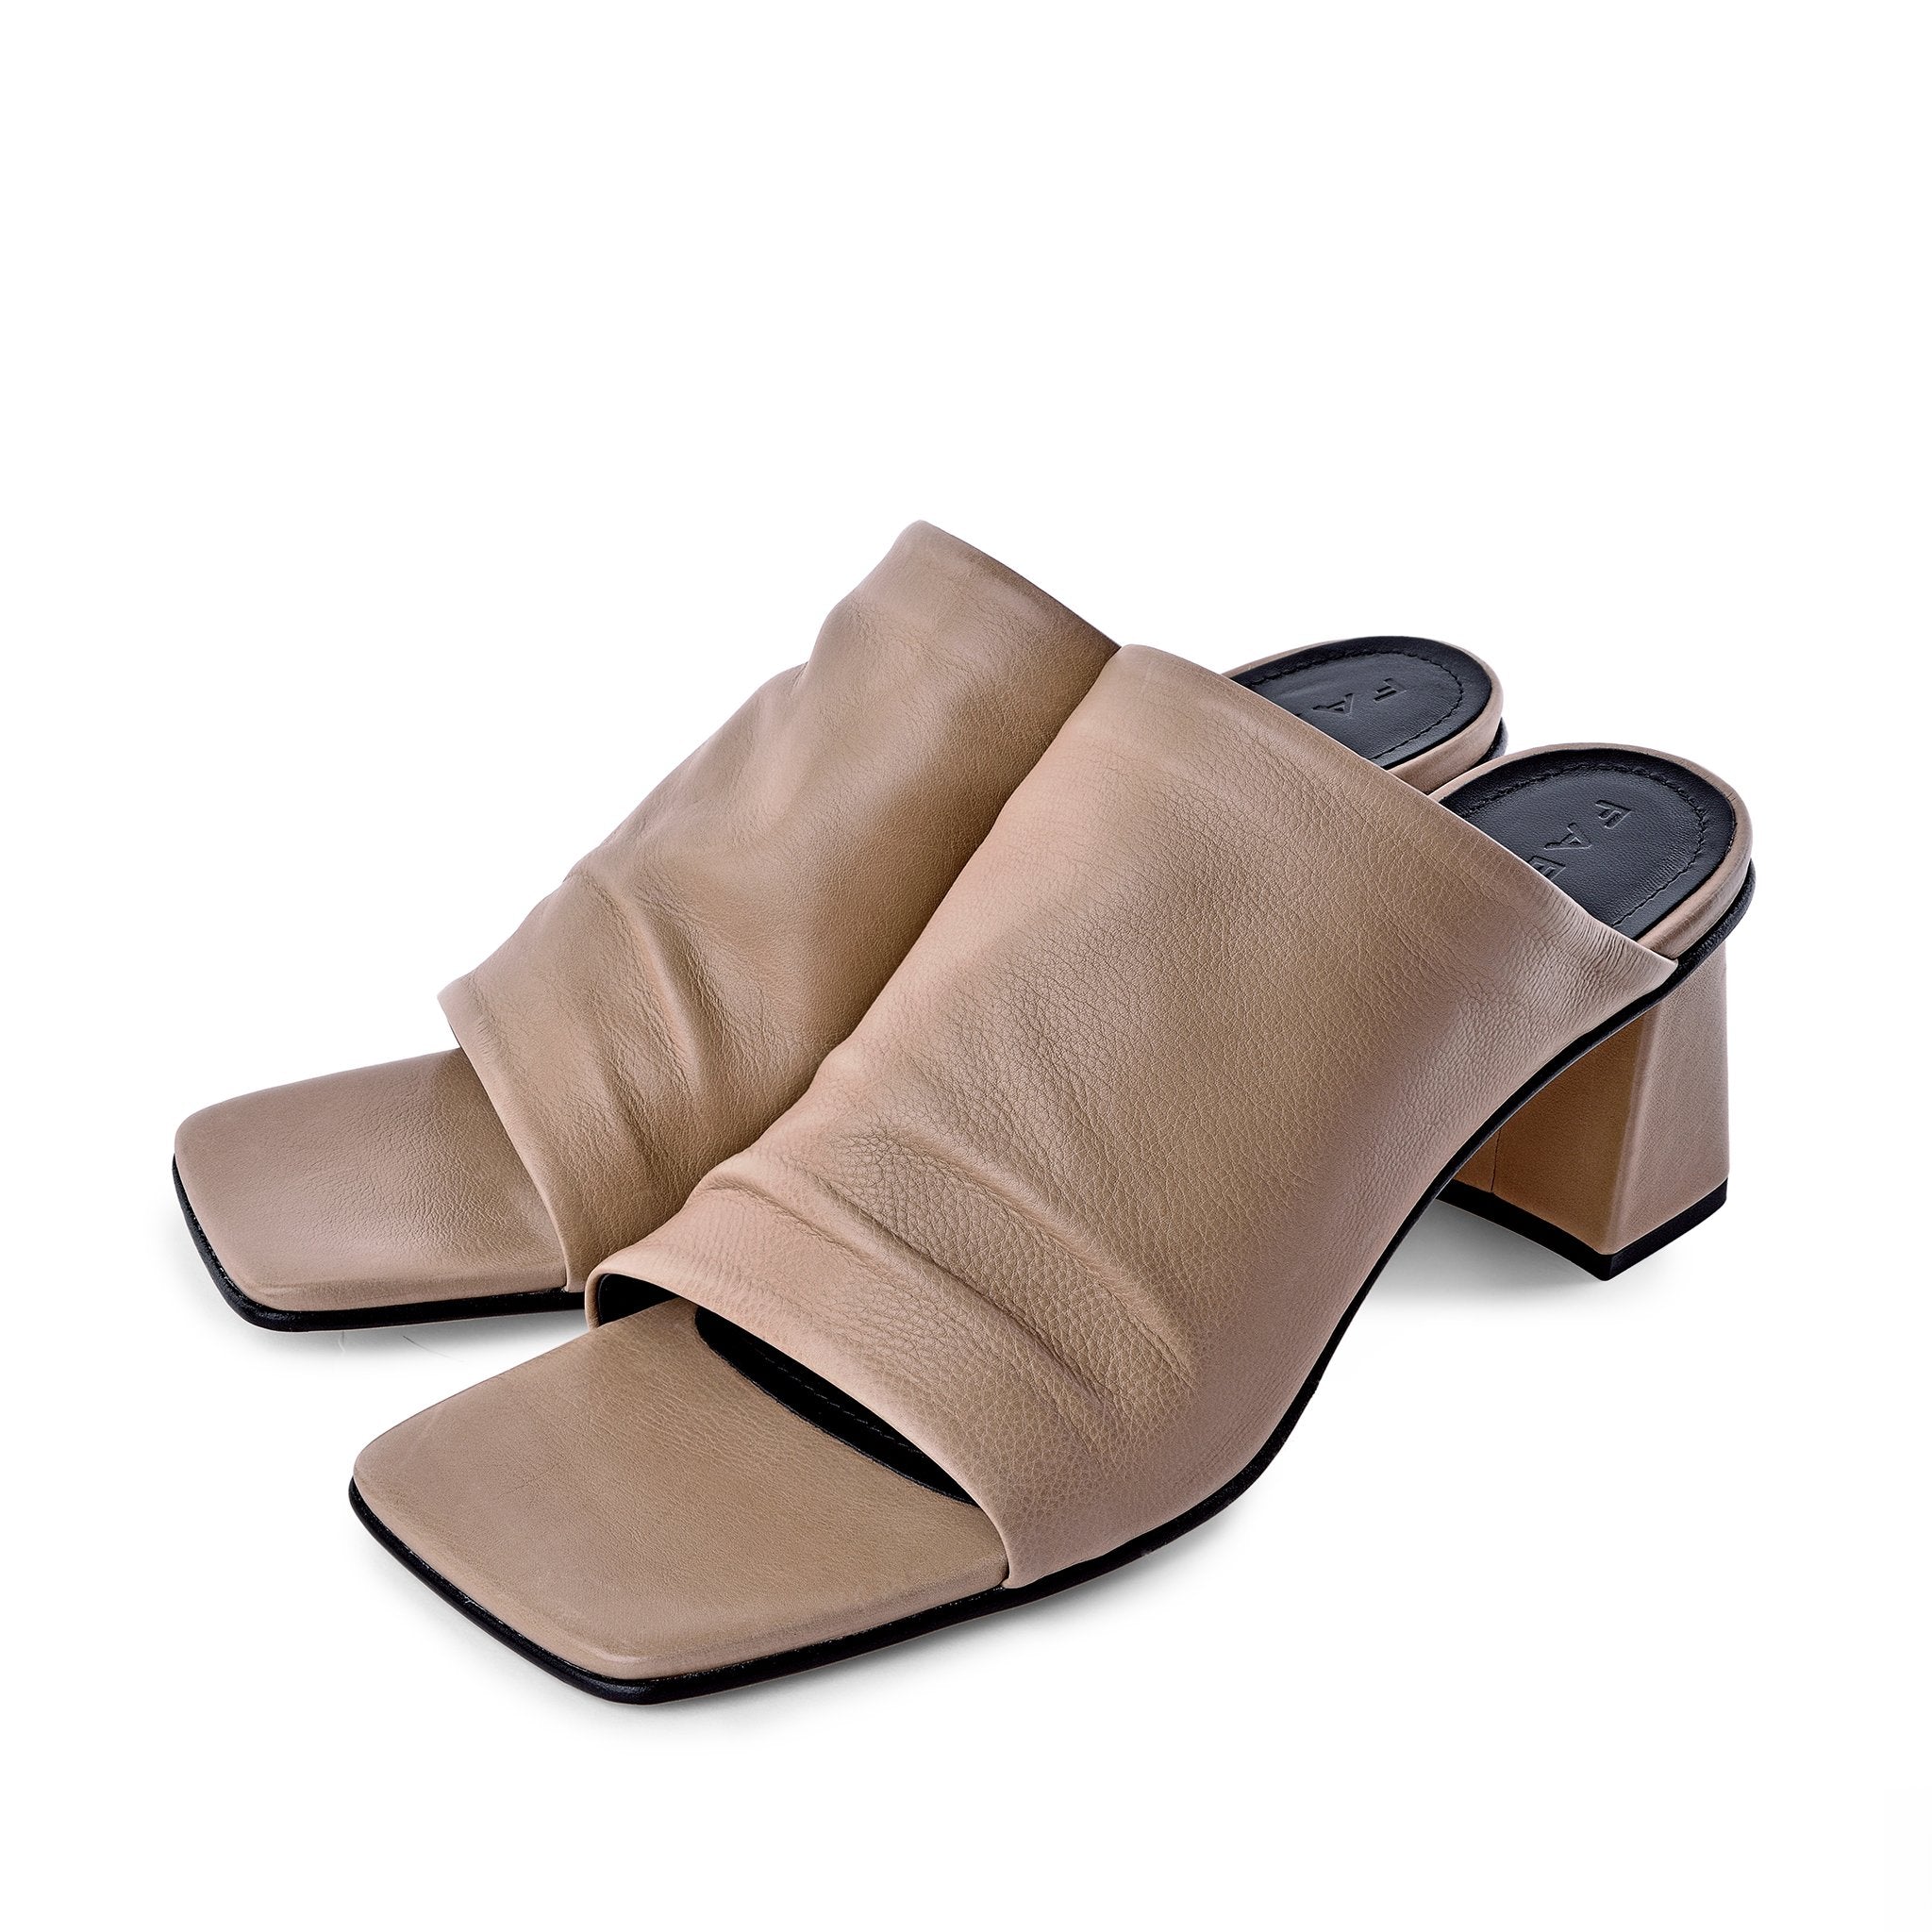 Virgi Taupe Leather Sandals 1280 - 7